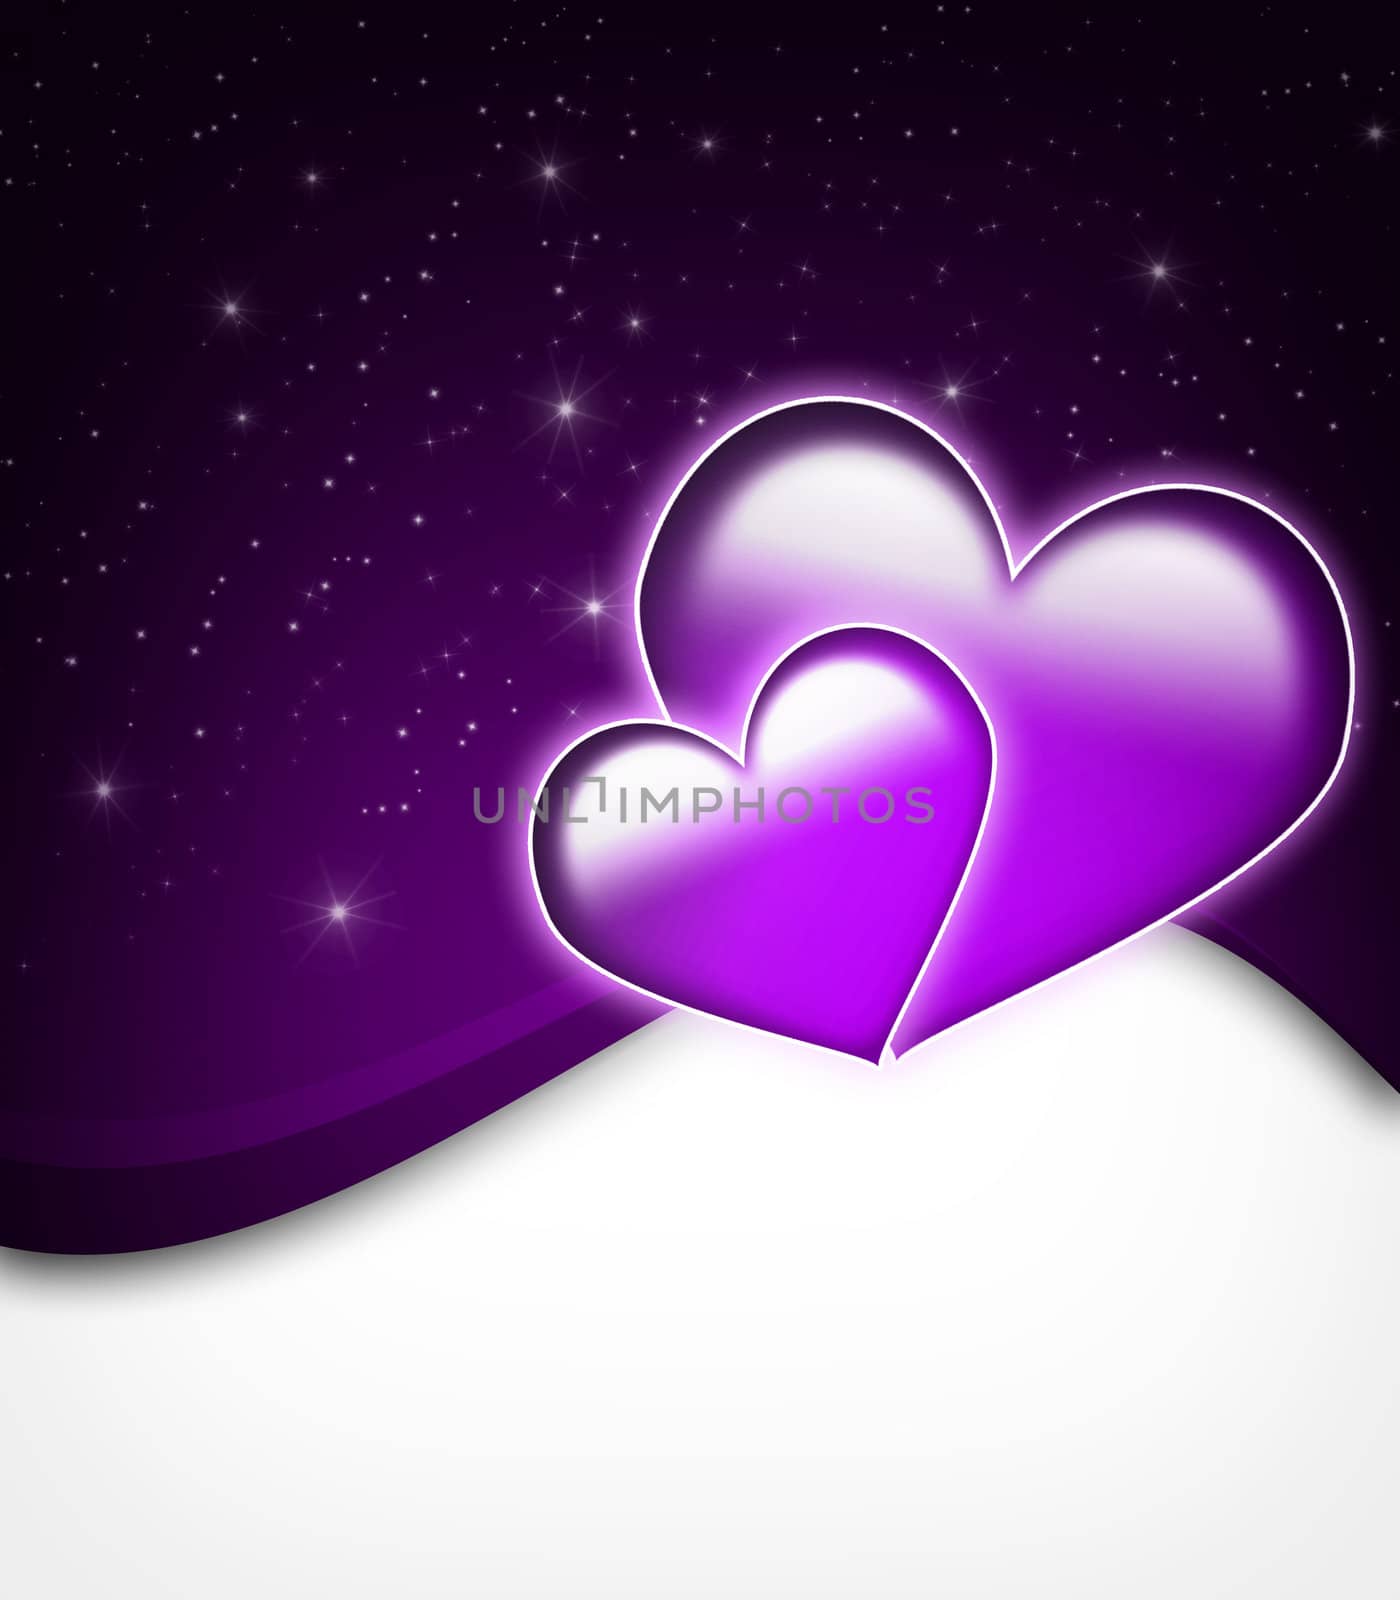 Valentines Day Card with  two big hearts and stars - all in purple